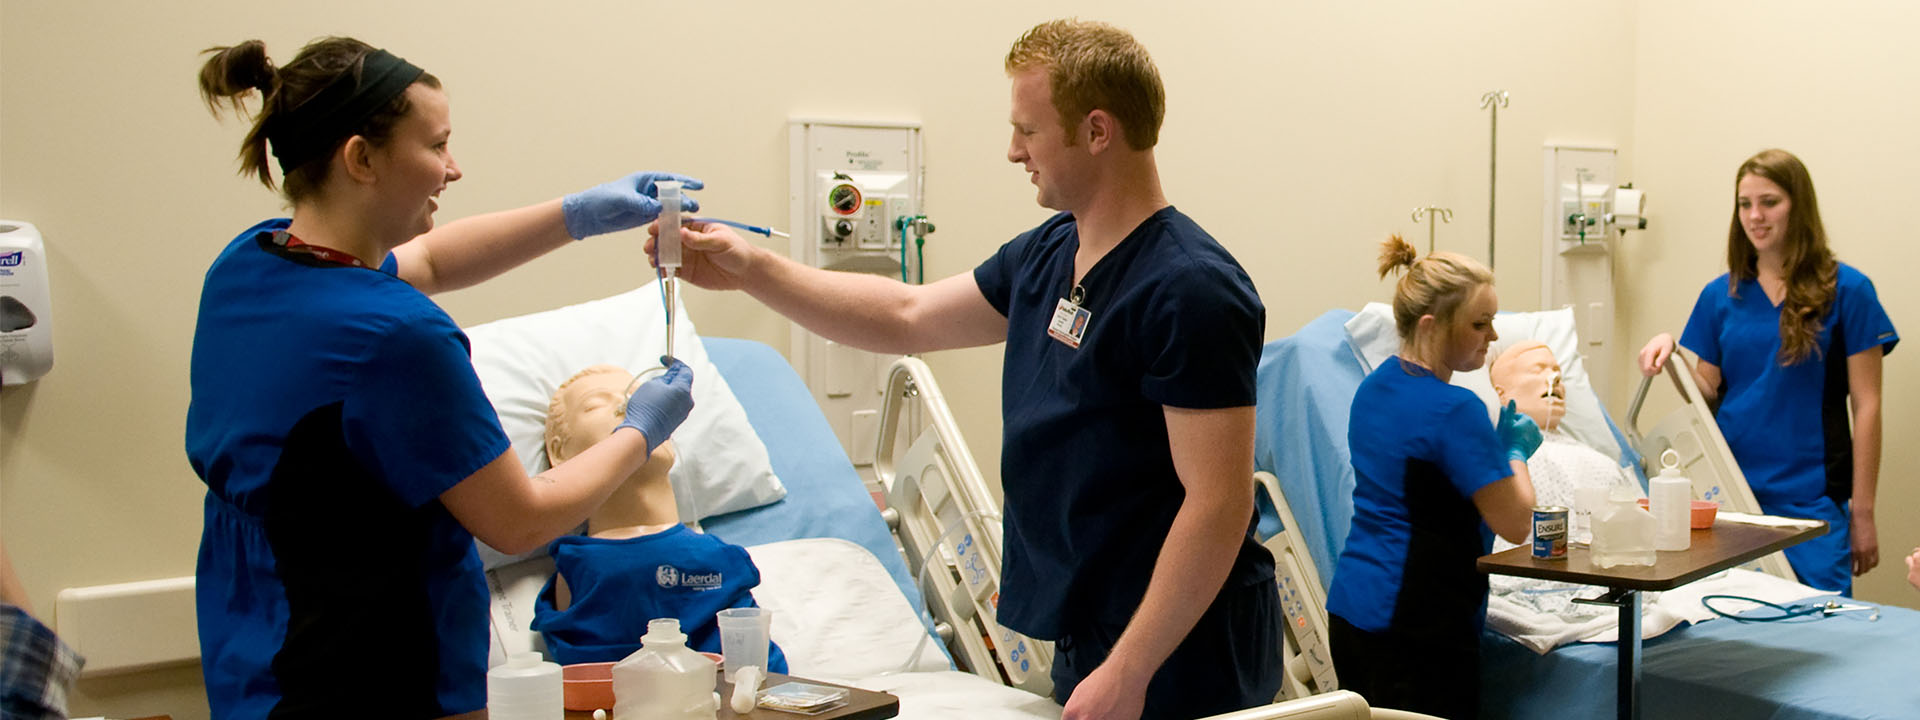 Students practicing fluid delivery to a mannequin